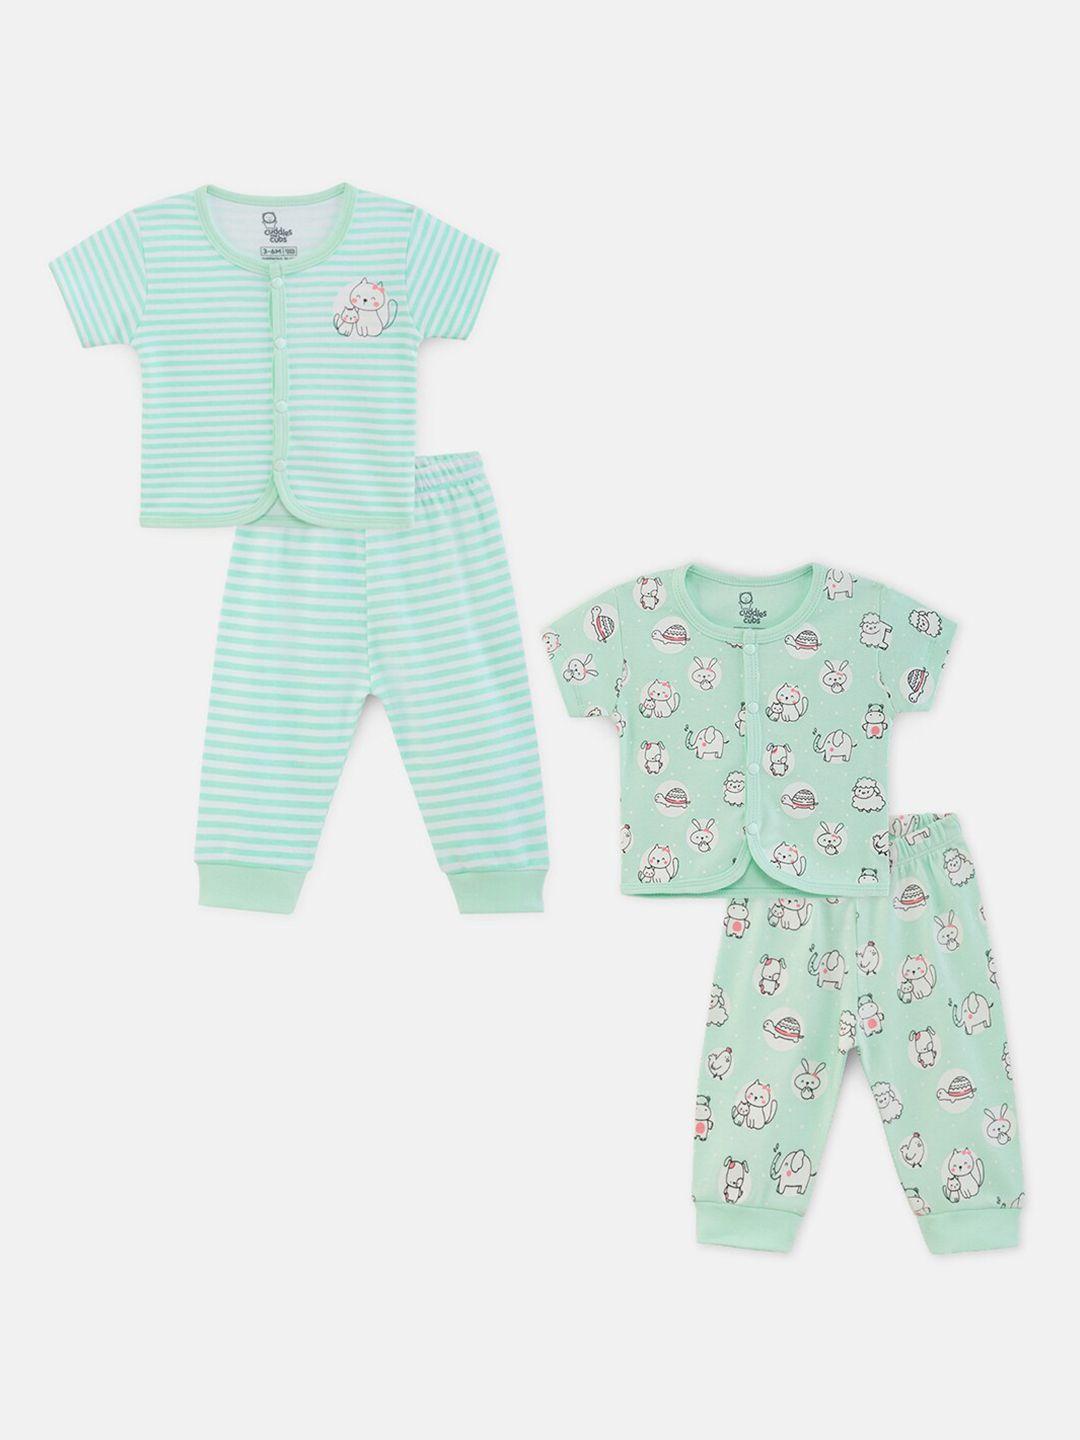 cuddles-for-cubs-infant-kids-pack-of-2-printed-pure-cotton-jhabla-&-pyjamas-clothing-set